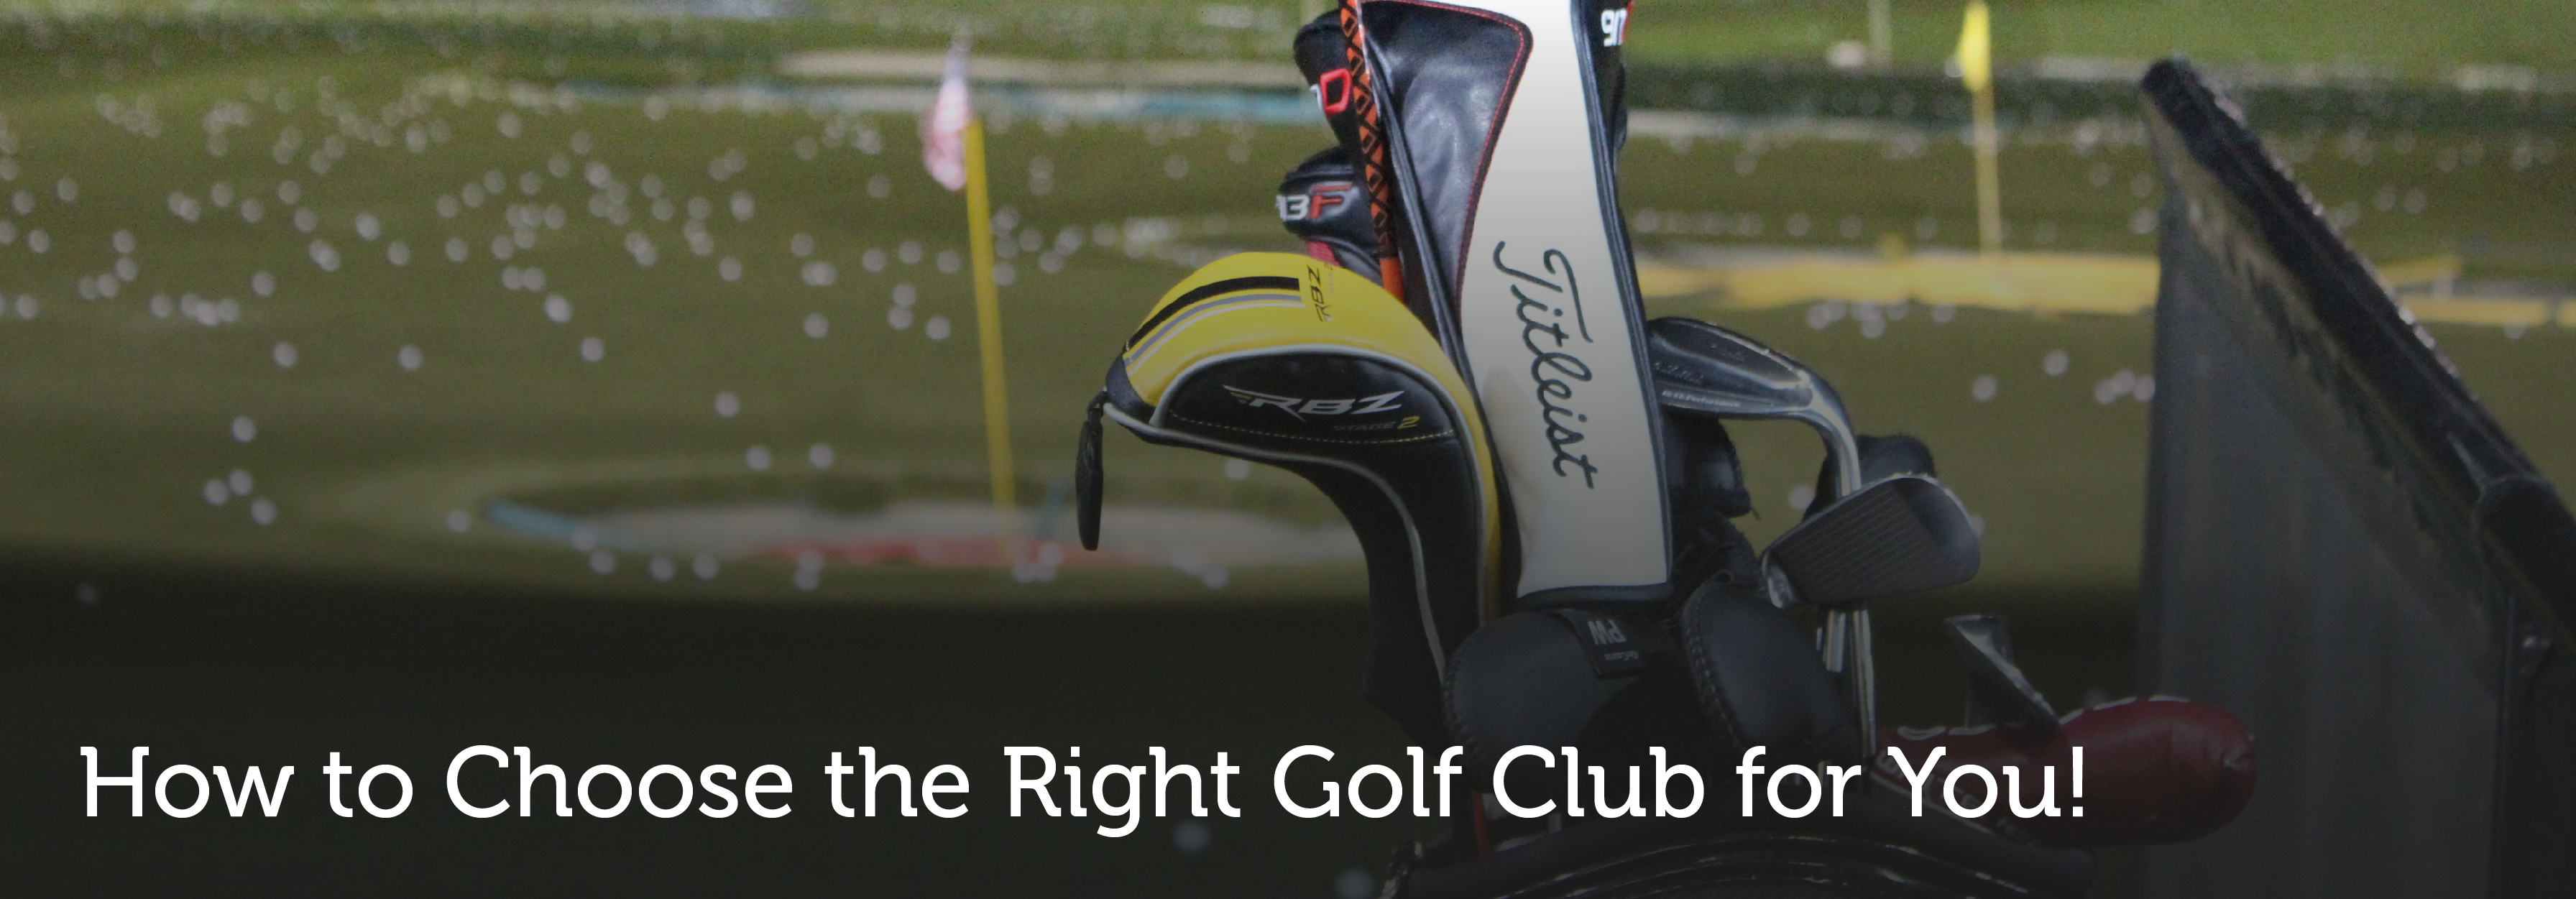 How to Choose the Right Golf Club for You | Golf Drives